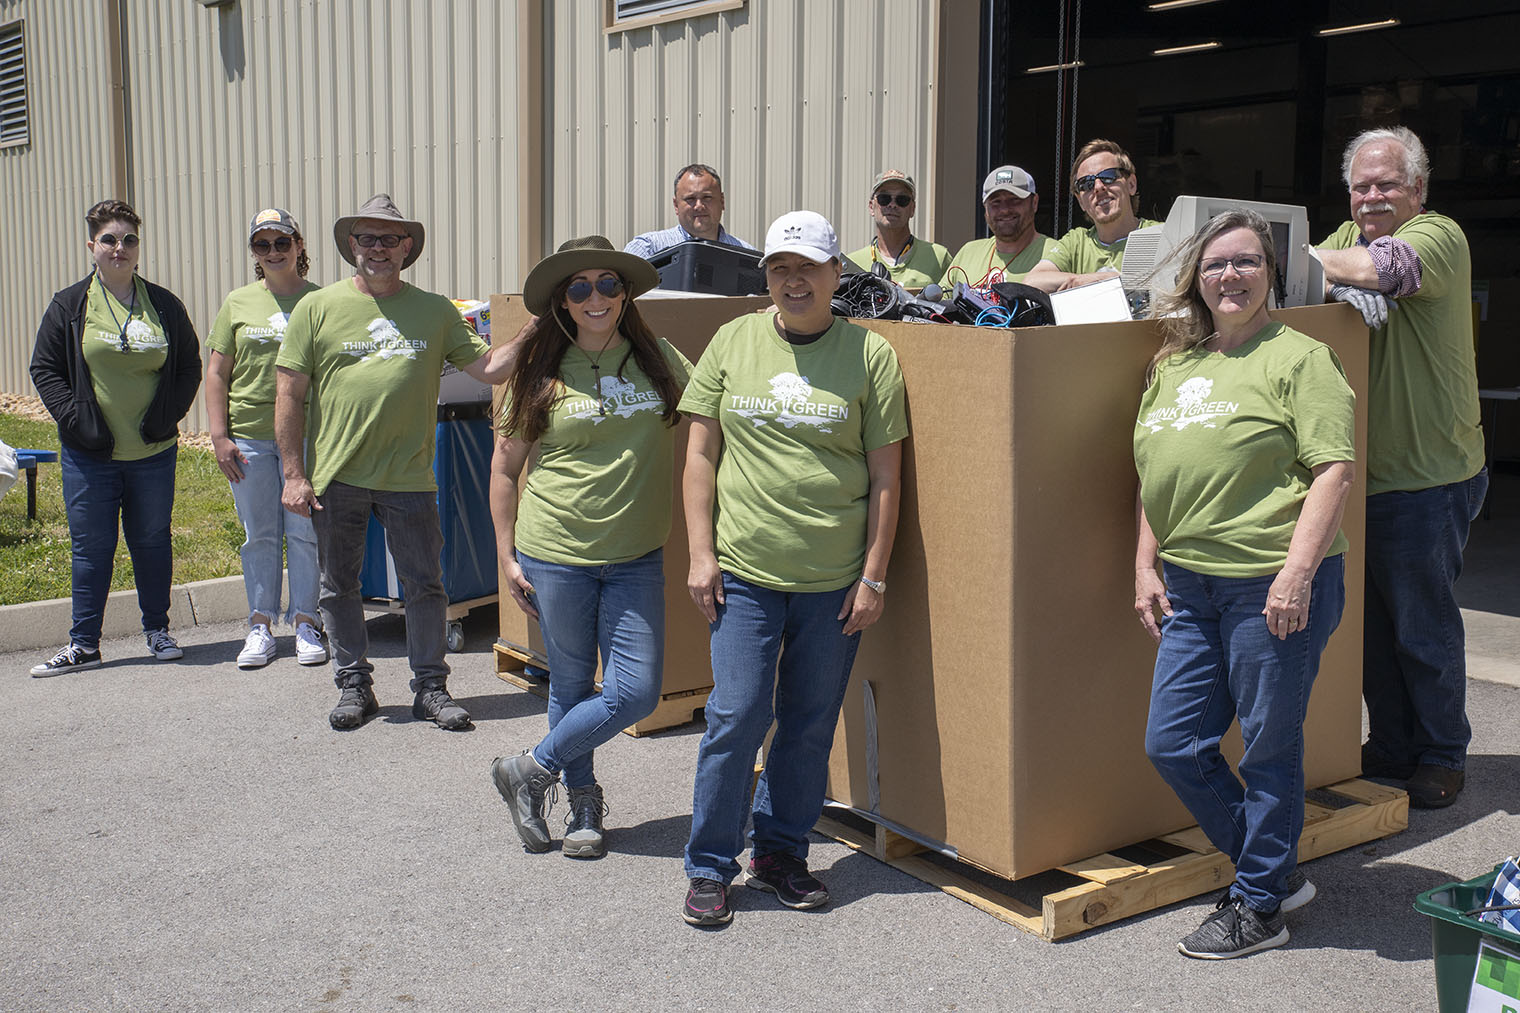 ORISE’s Environmental, Safety and Health team collected nearly five tons of recyclable materials